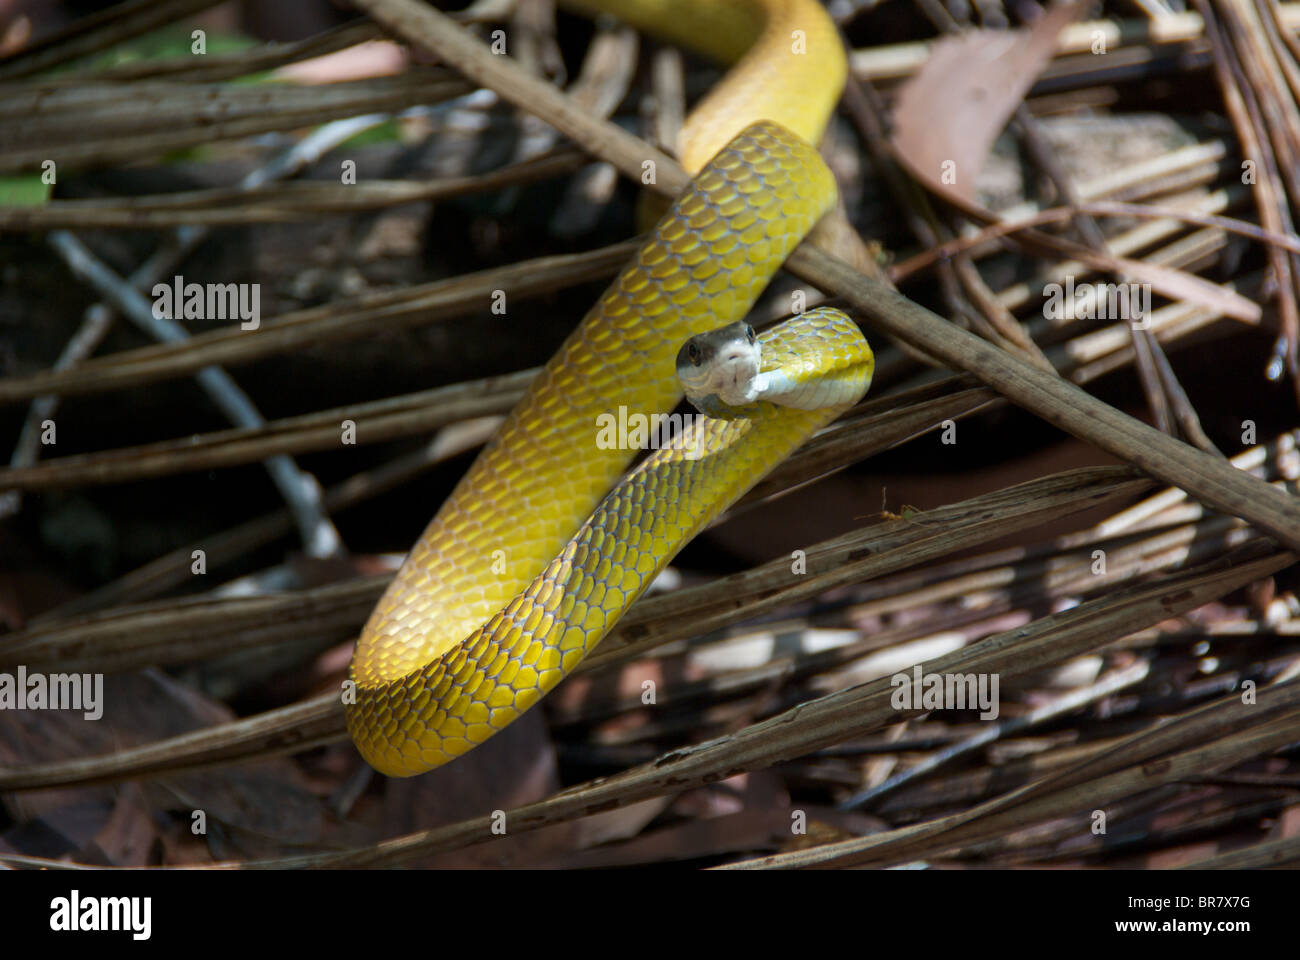 A Golden Tree Snake (Dendrelaphis punctulata) in a defensive position. Stock Photo